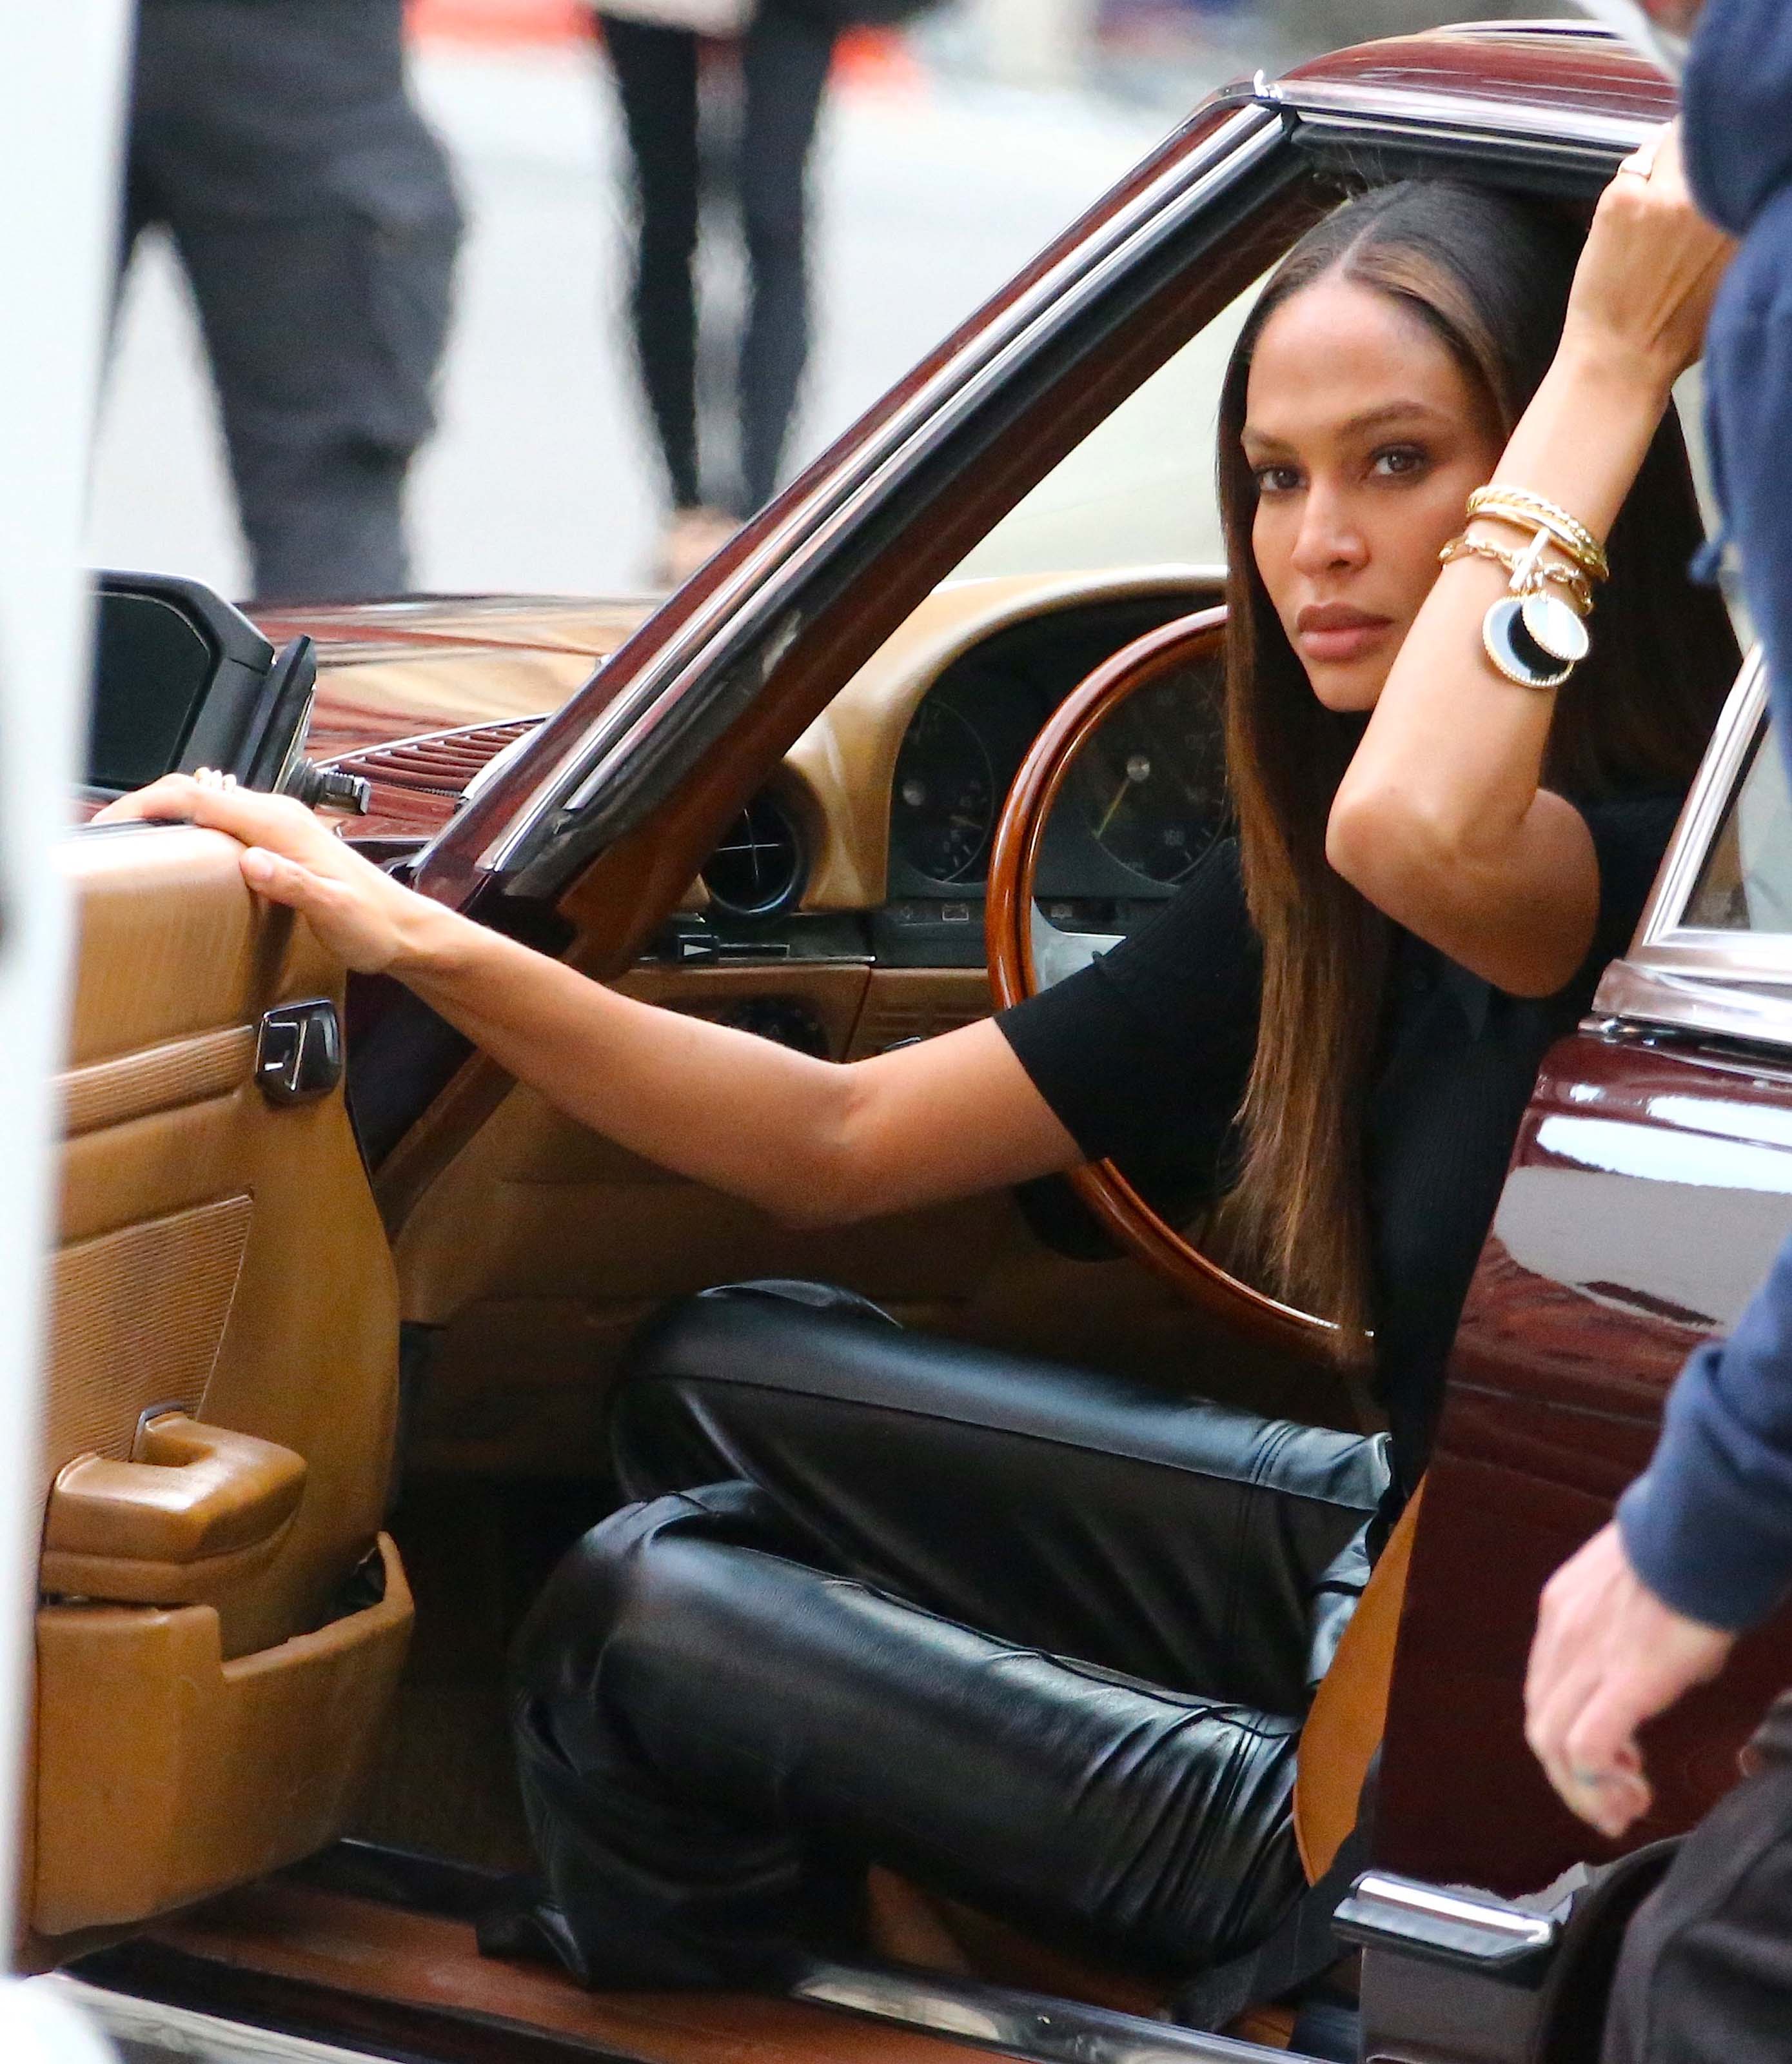 Joan Smalls doing a photoshoot in Tribeca, New York City